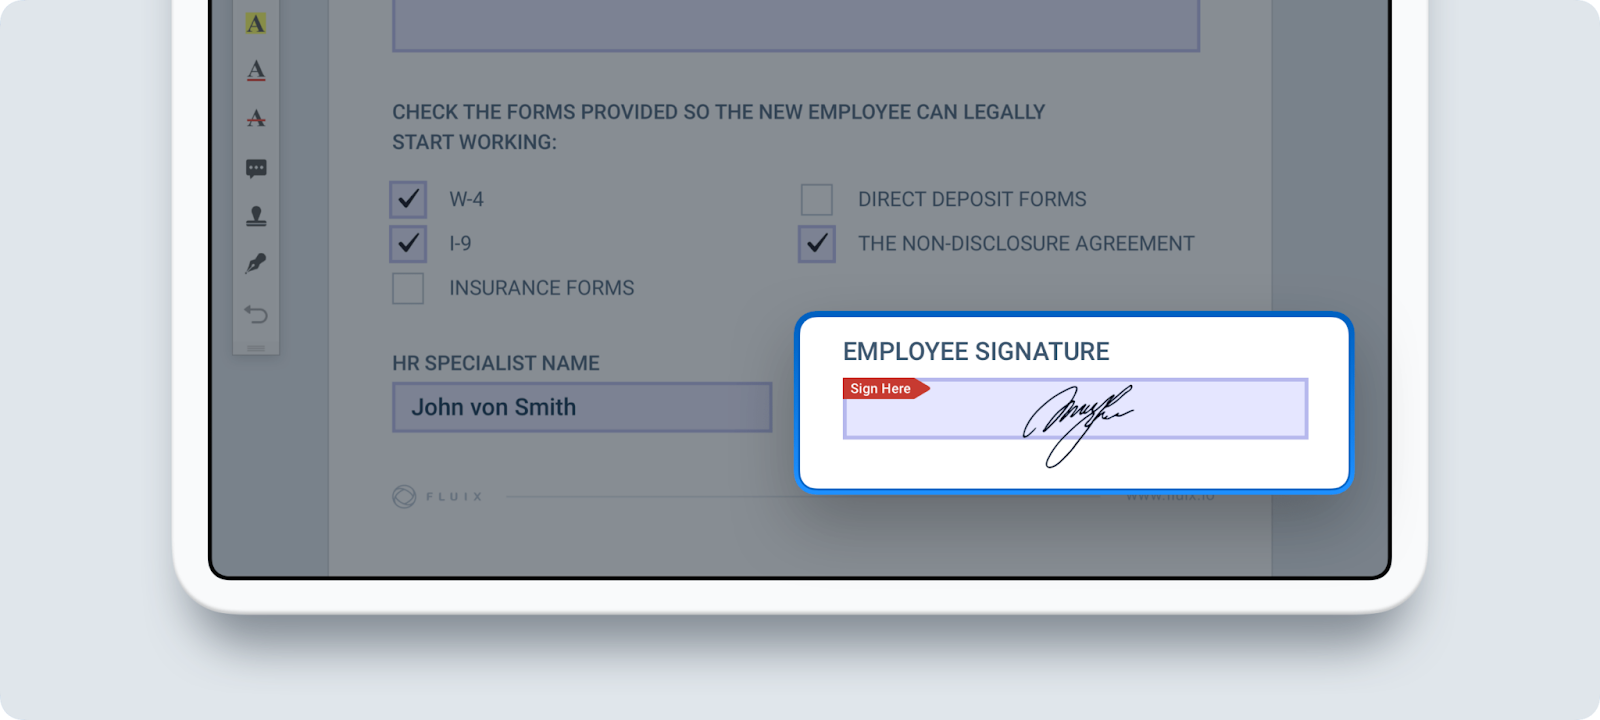 A mobile form with an e-signature field